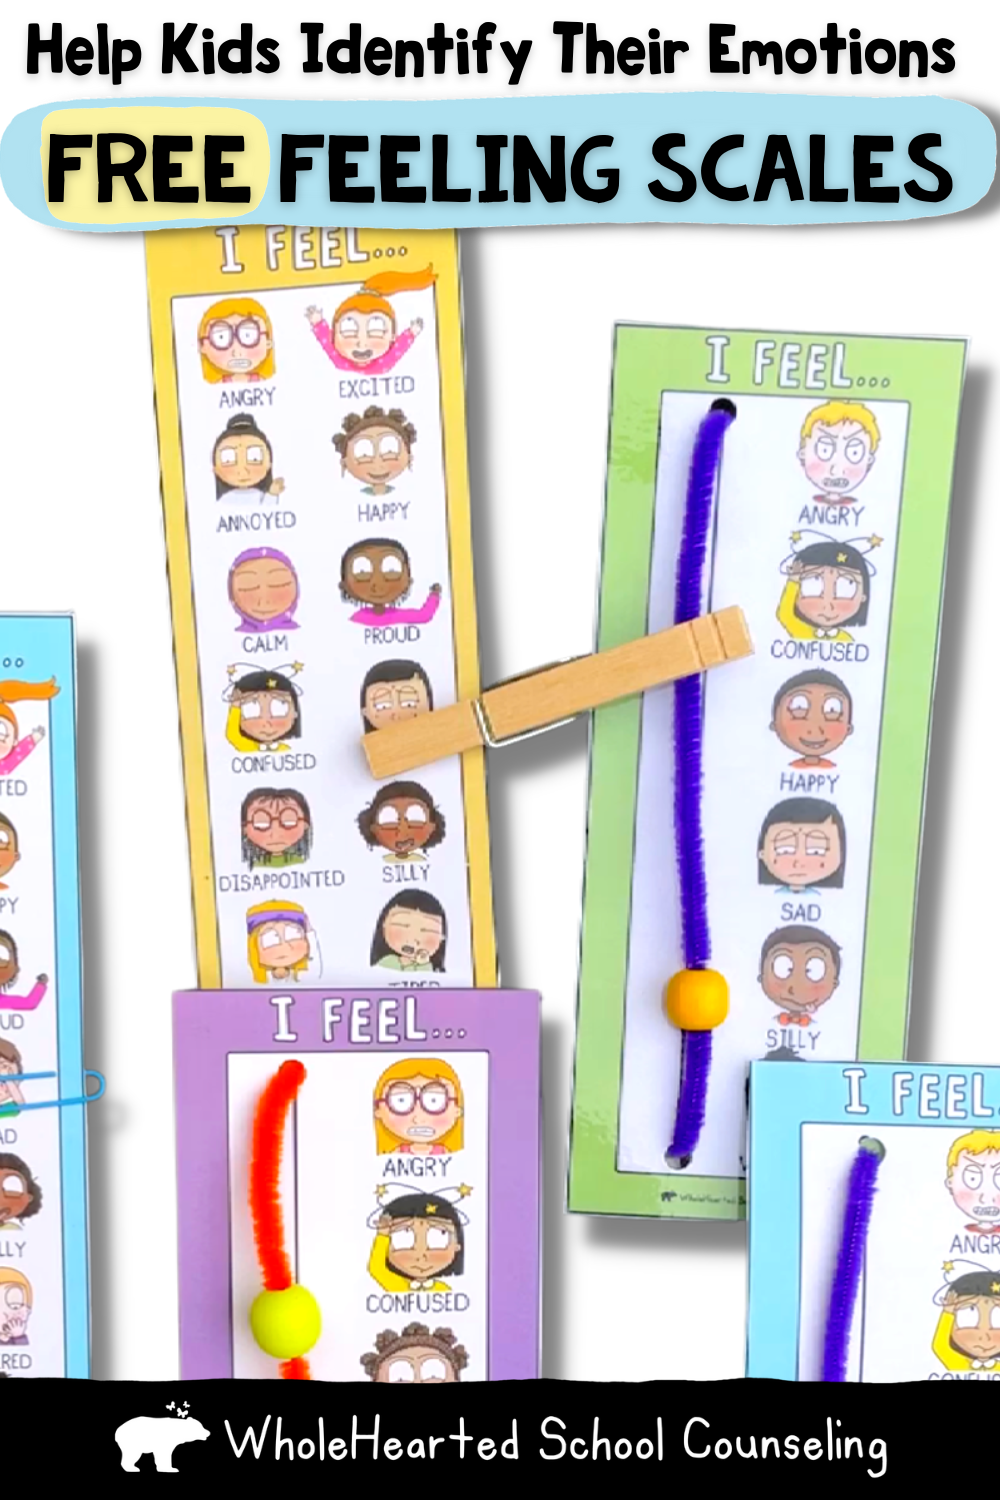 Free feelings scales for kids to identify their emotions.